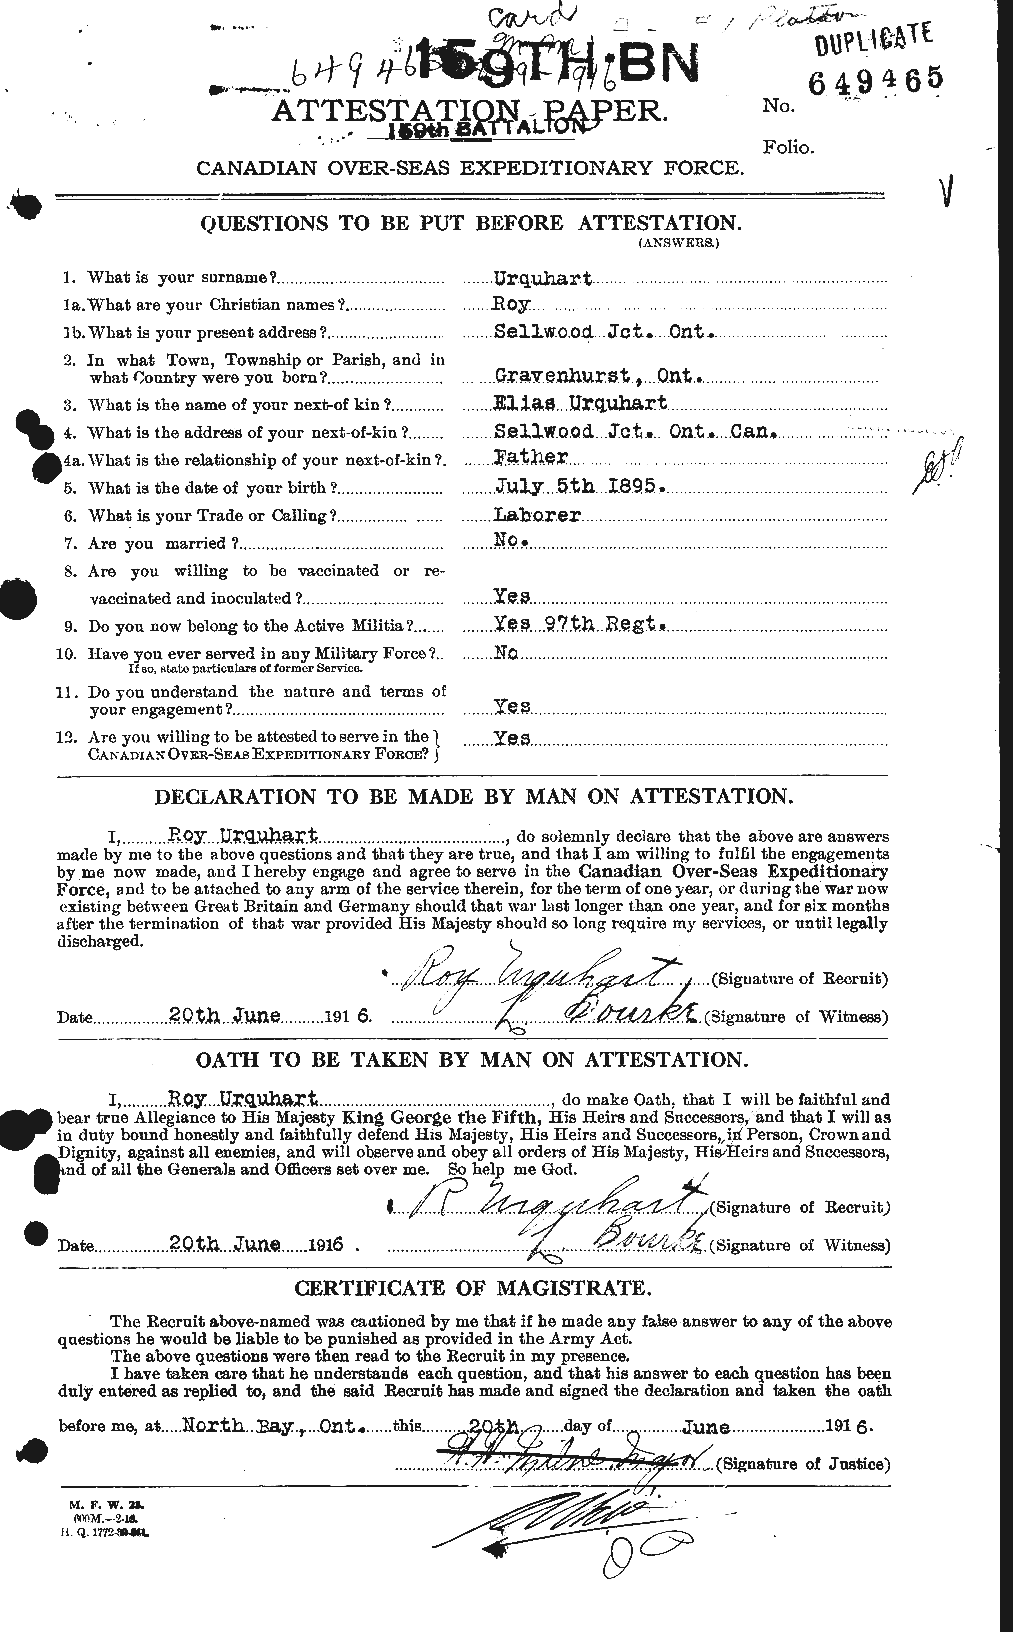 Personnel Records of the First World War - CEF 643406a